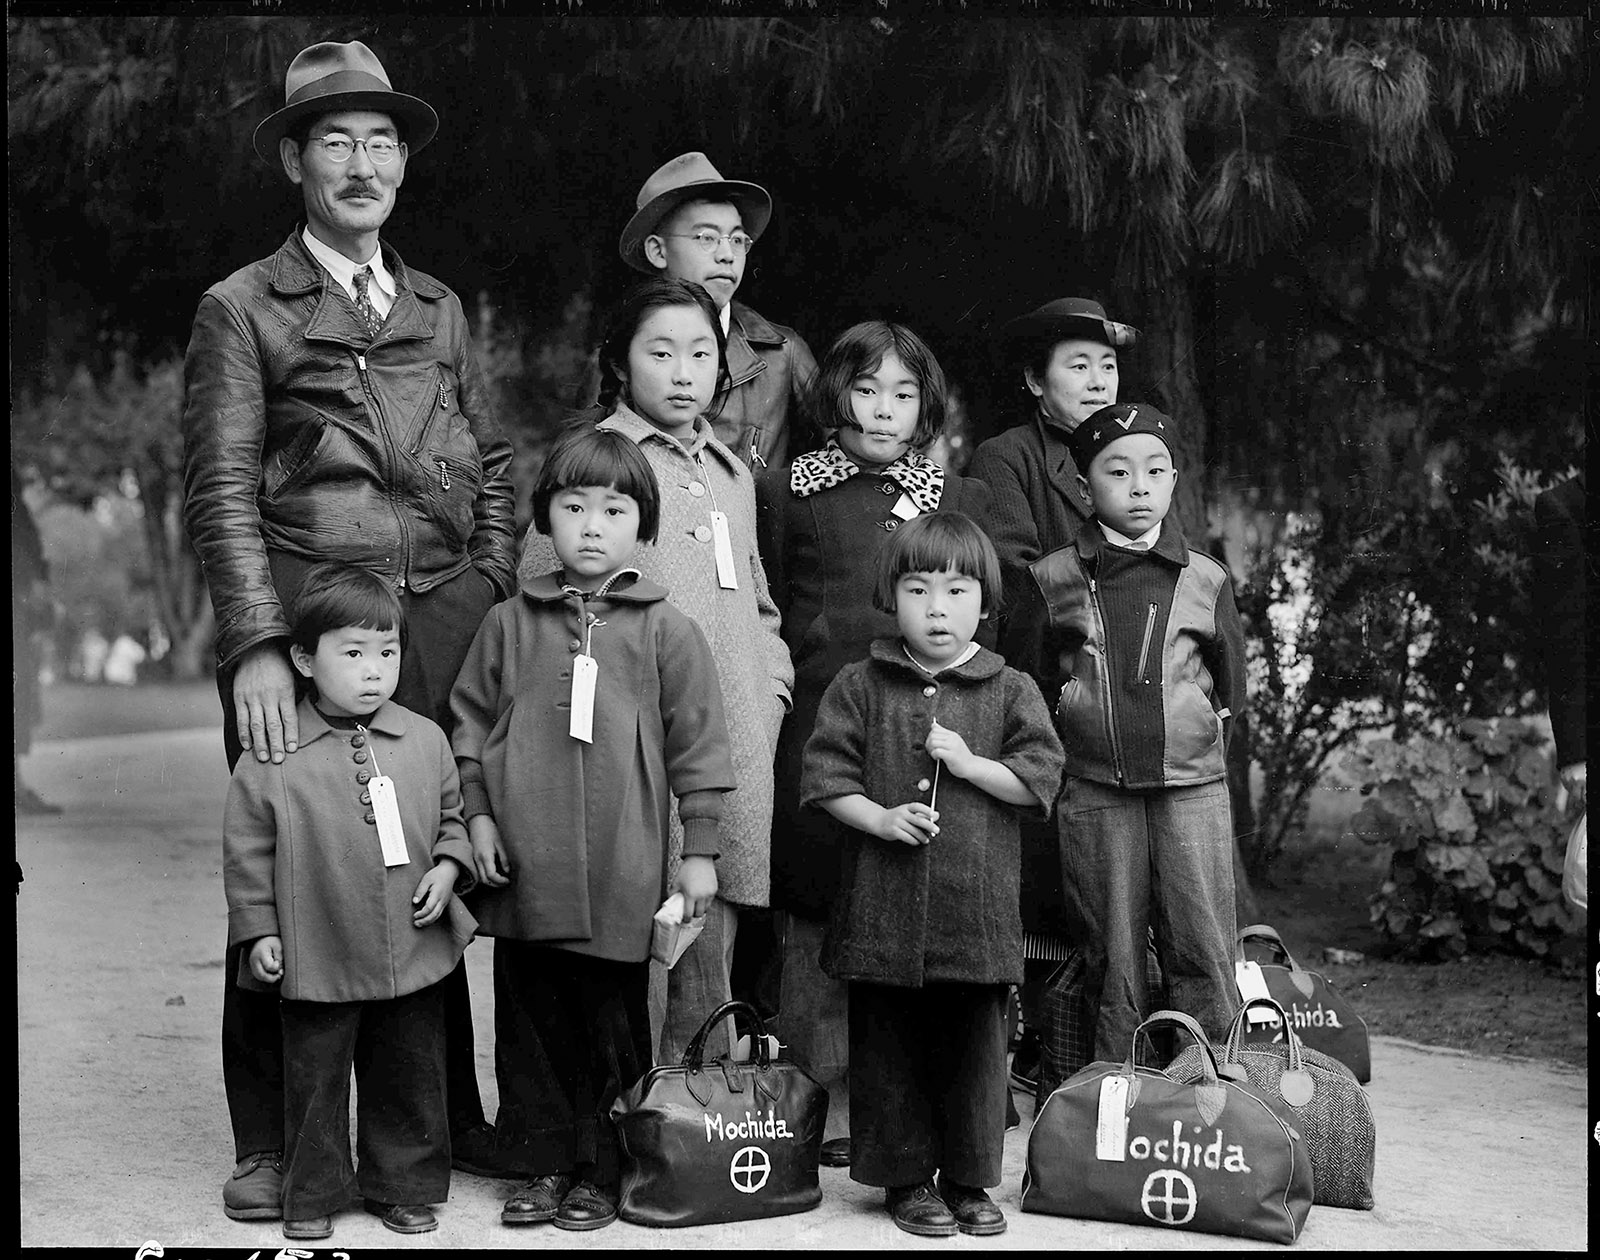 ‘Members of the Mochida family awaiting evacuation bus,’ Hayward, California, May 1942; photograph by Dorothea Lange. It is on view in the exhibition ‘Then They Came for Me: Incarceration of Japanese Americans During World War II,’ at the International Center of Photography, New York City, January 26–May 6, 2018.